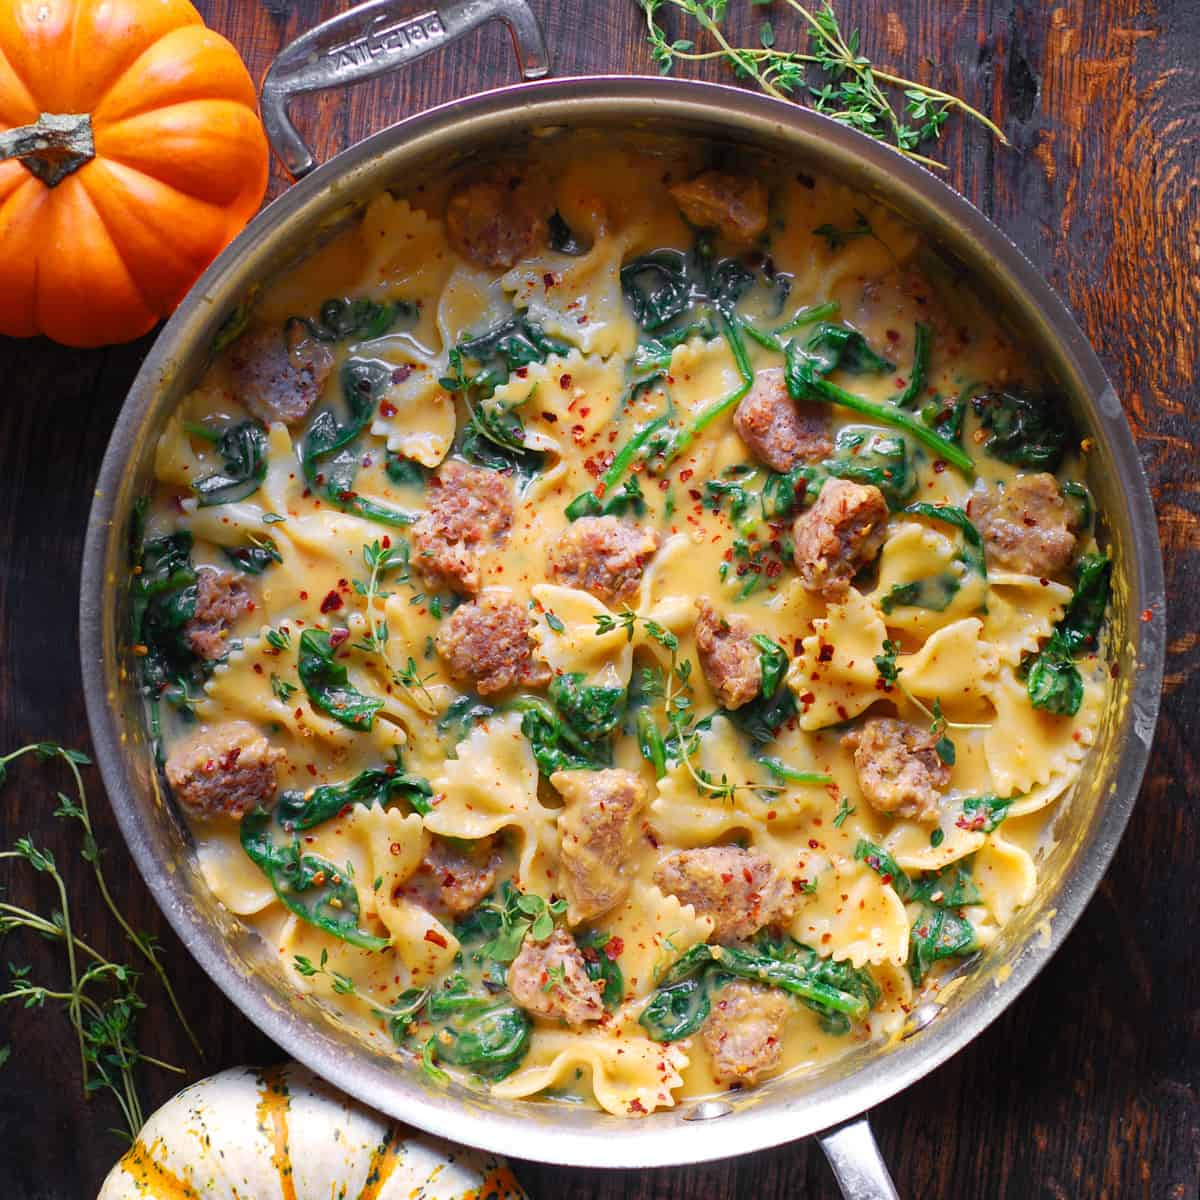 butternut squash bow-tie pasta with Italian sausage and spinach - in a stainless steel pan.